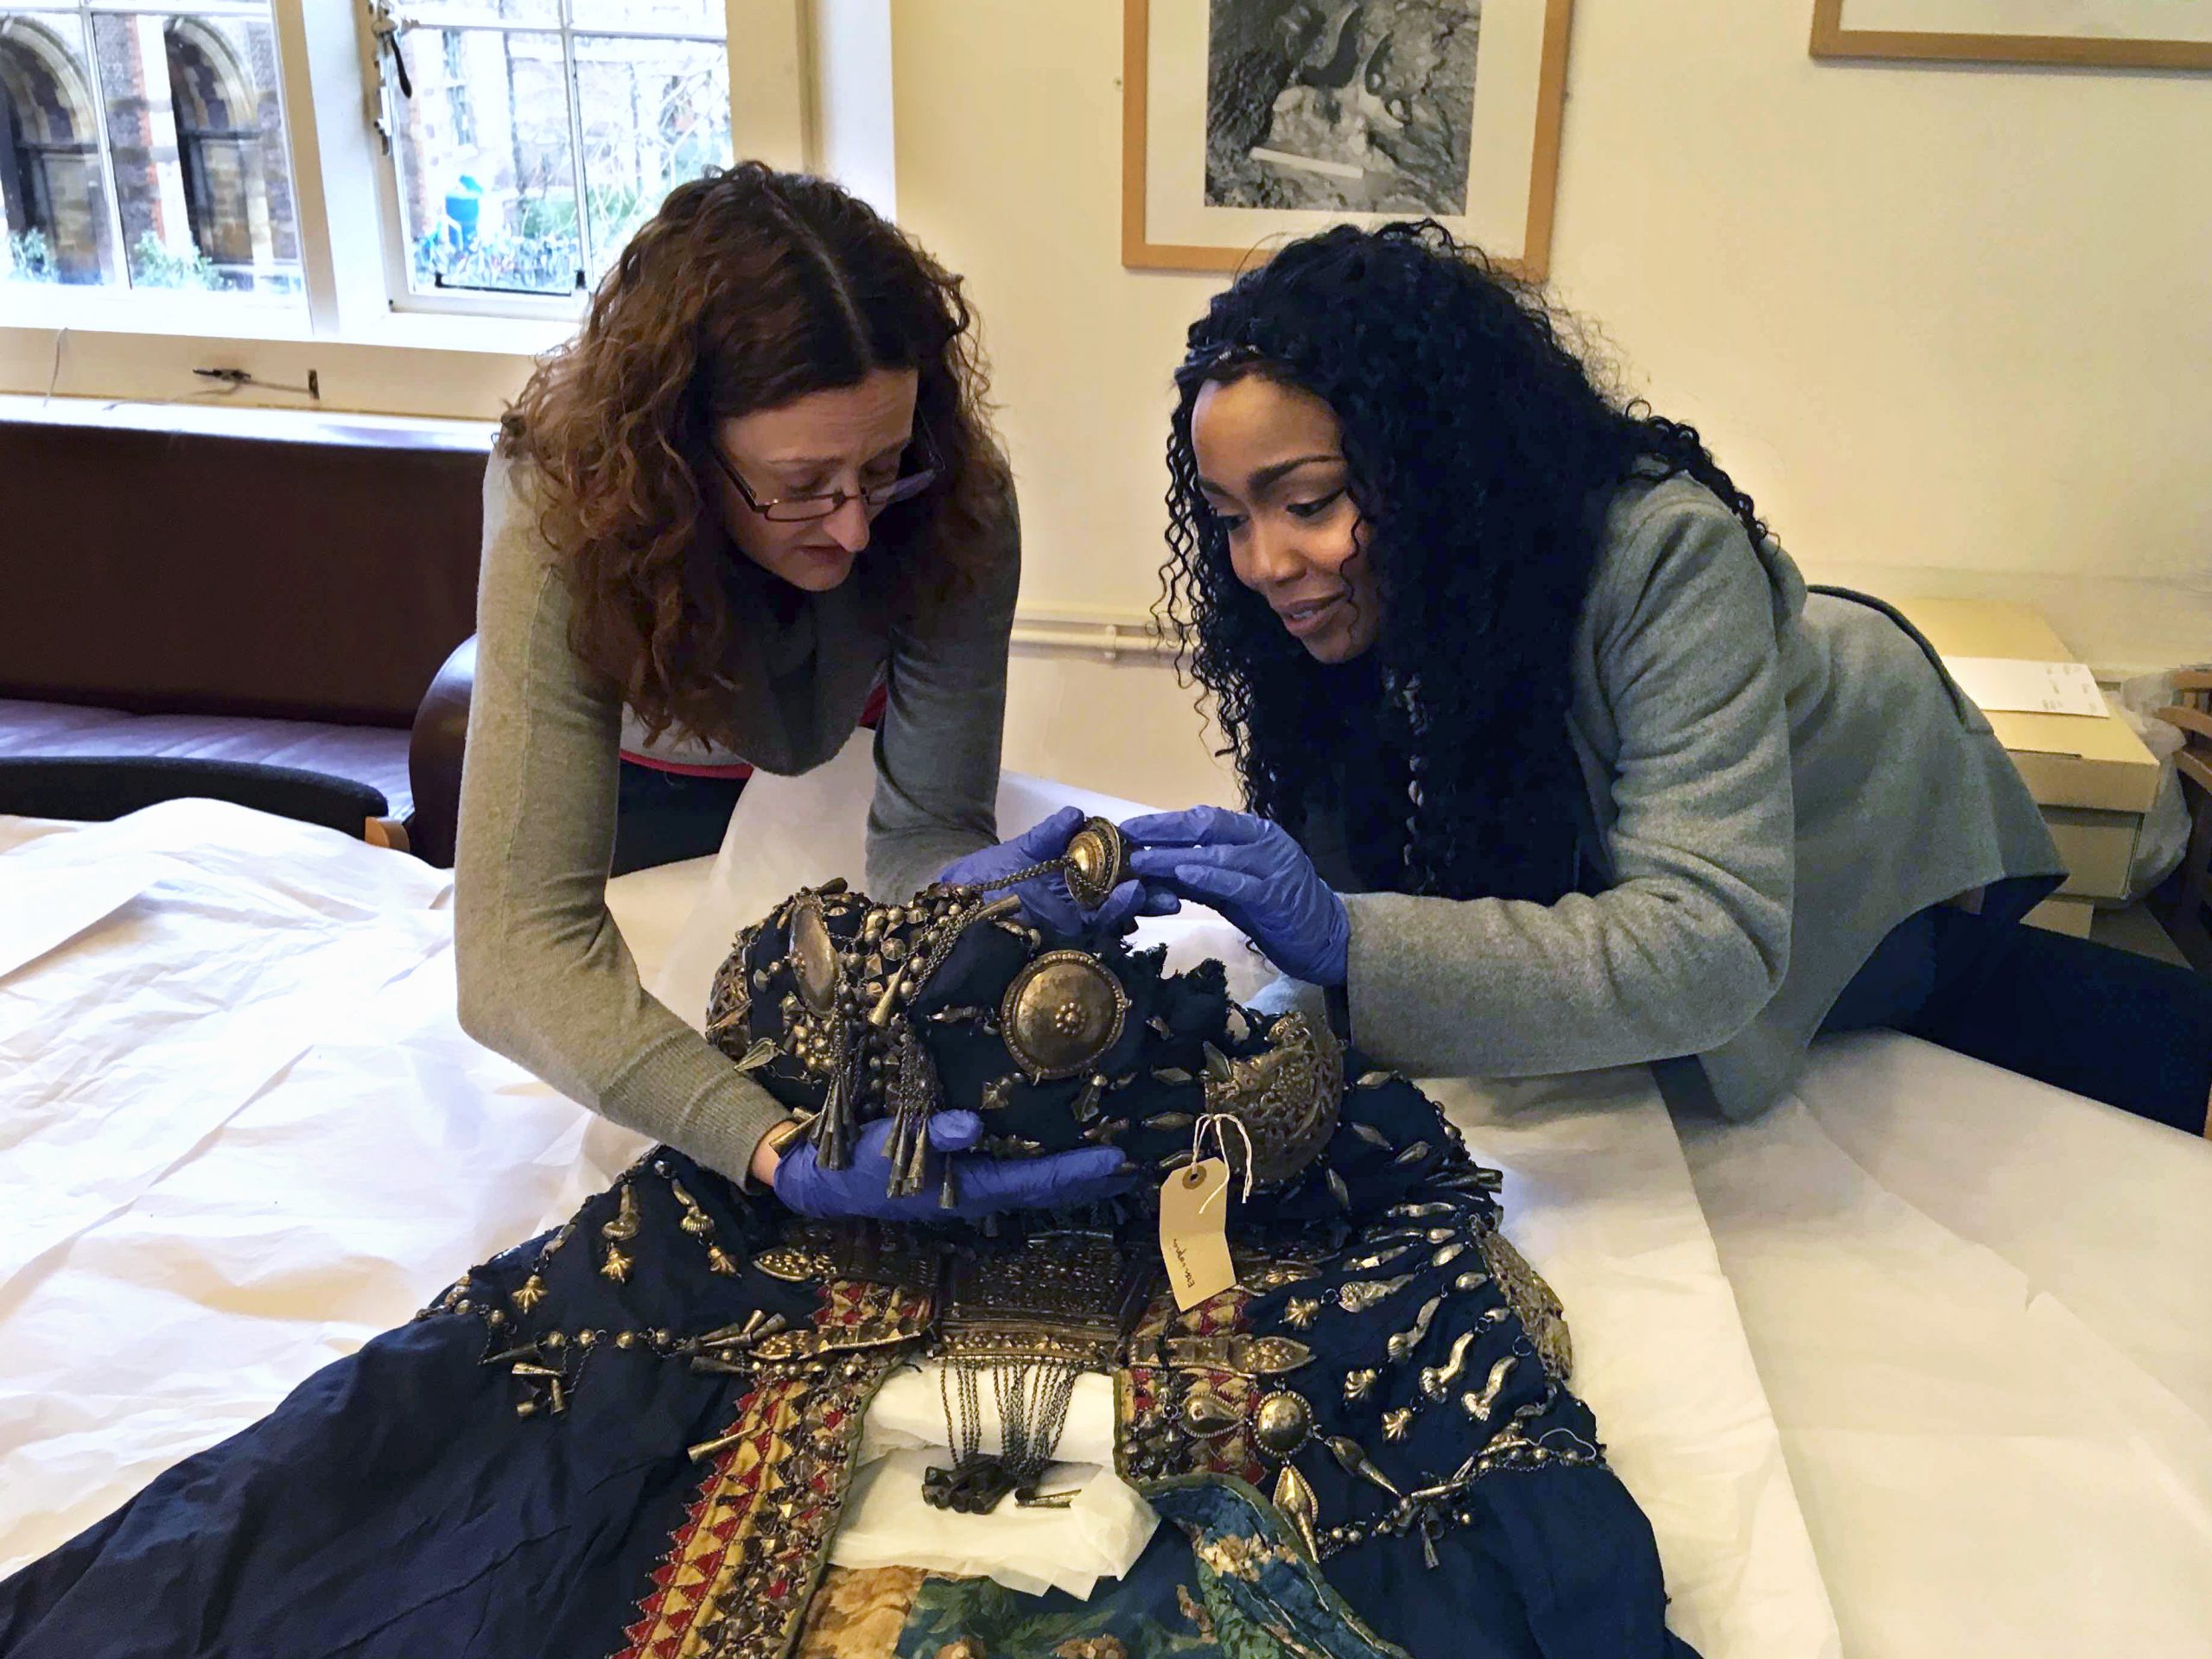 Researcher Vicky Ngari Wilson and Collections Manager for Anthropology Rachel Hand examining the robe of Abyssinian Queen Woyzaro Terunesh